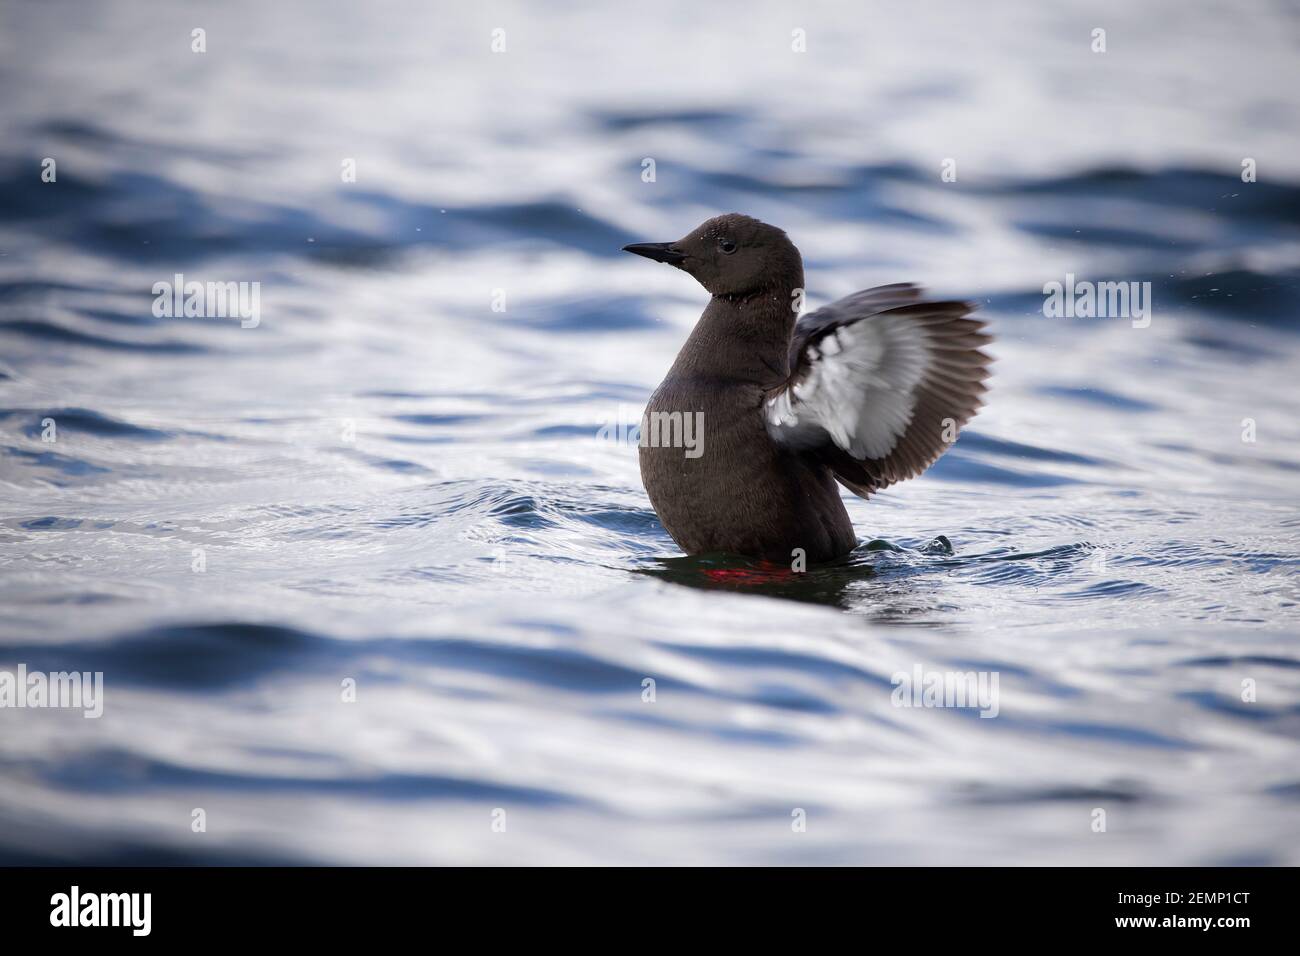 A black guillemot flapping its wings at sea Stock Photo